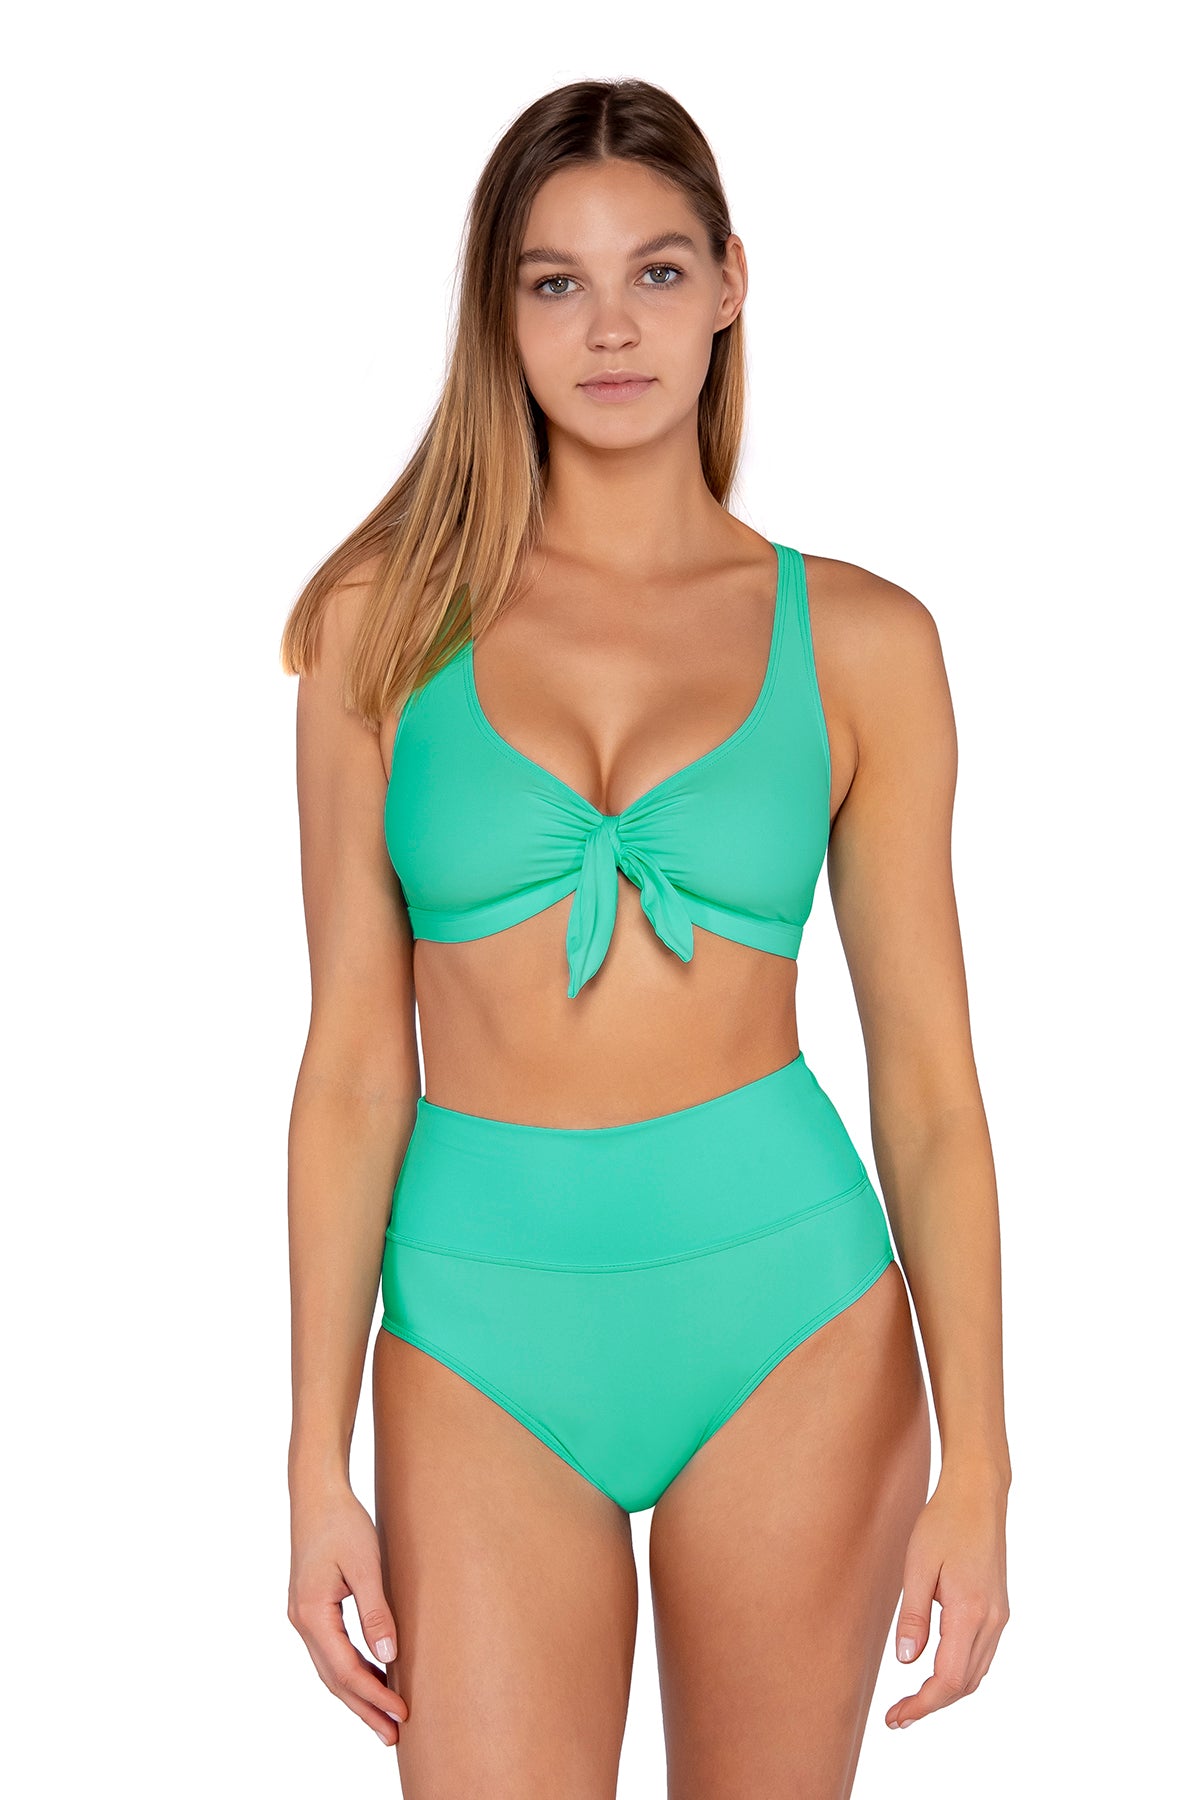 Front view of Sunsets Mint Brandi Bralette Top